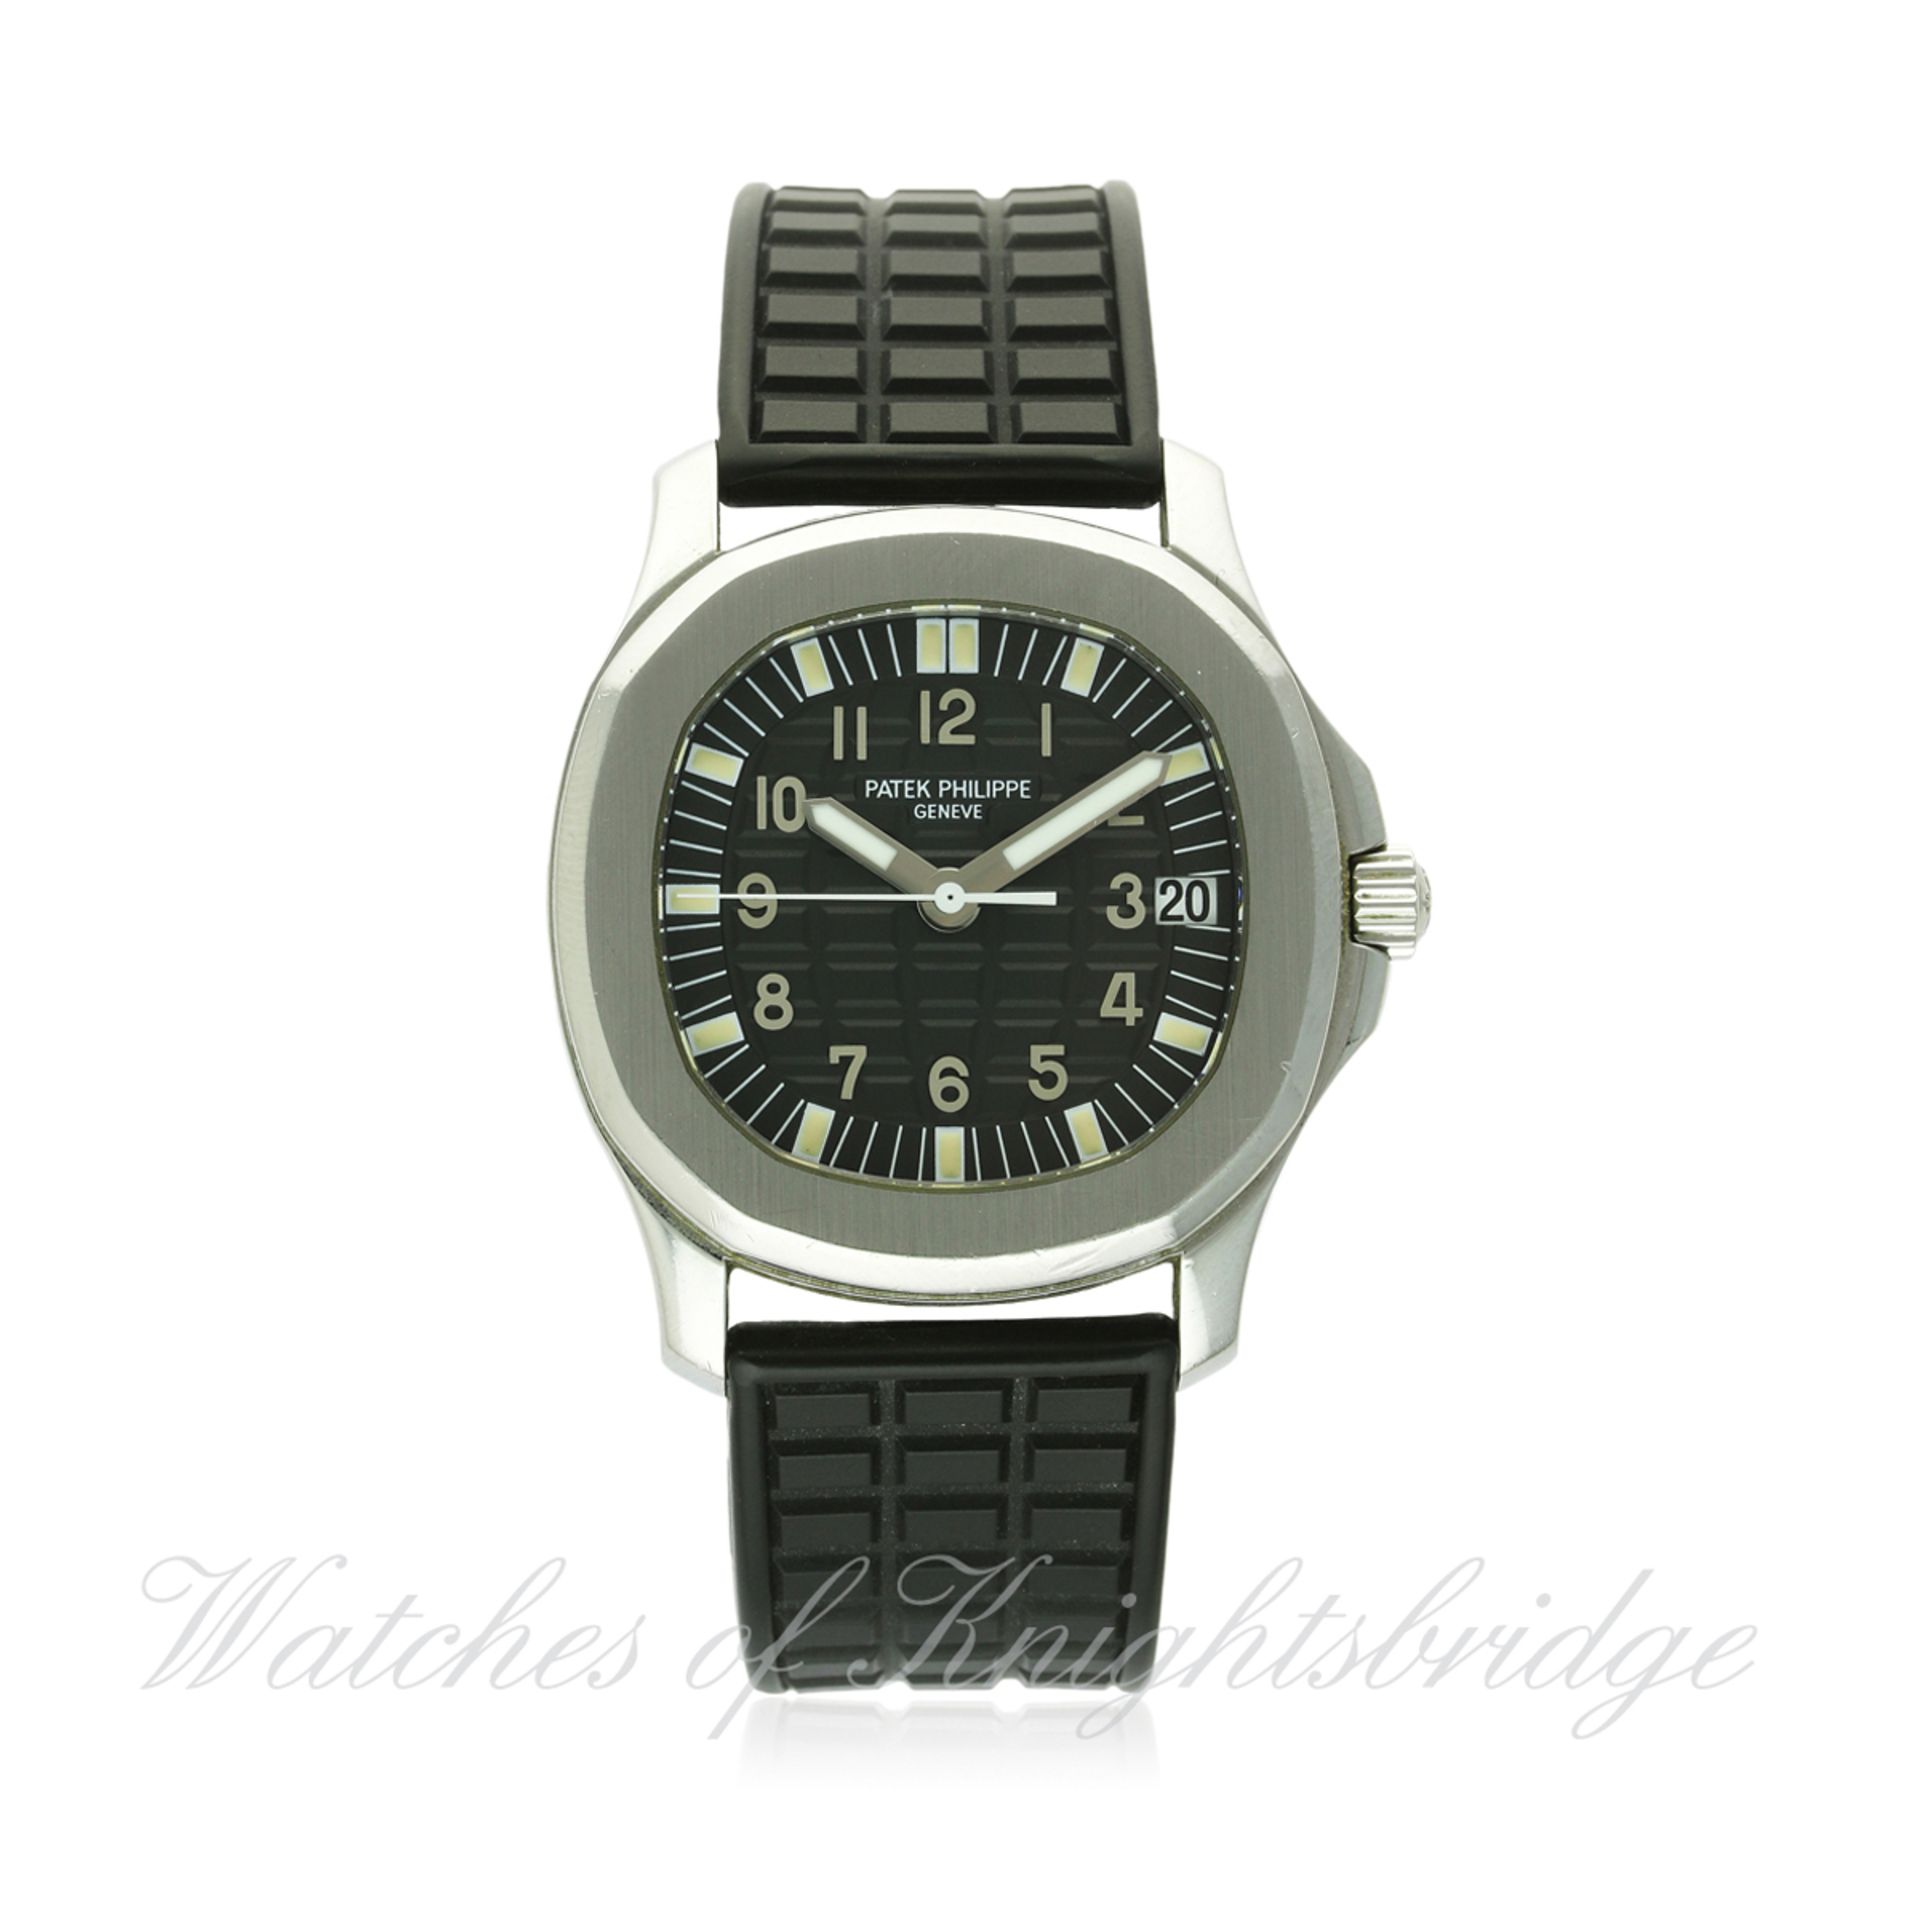 A GENTLEMAN'S STAINLESS STEEL PATEK PHILIPPE AQUANAUT AUTOMATIC WRIST WATCH DATED 1998, REF. 5066A